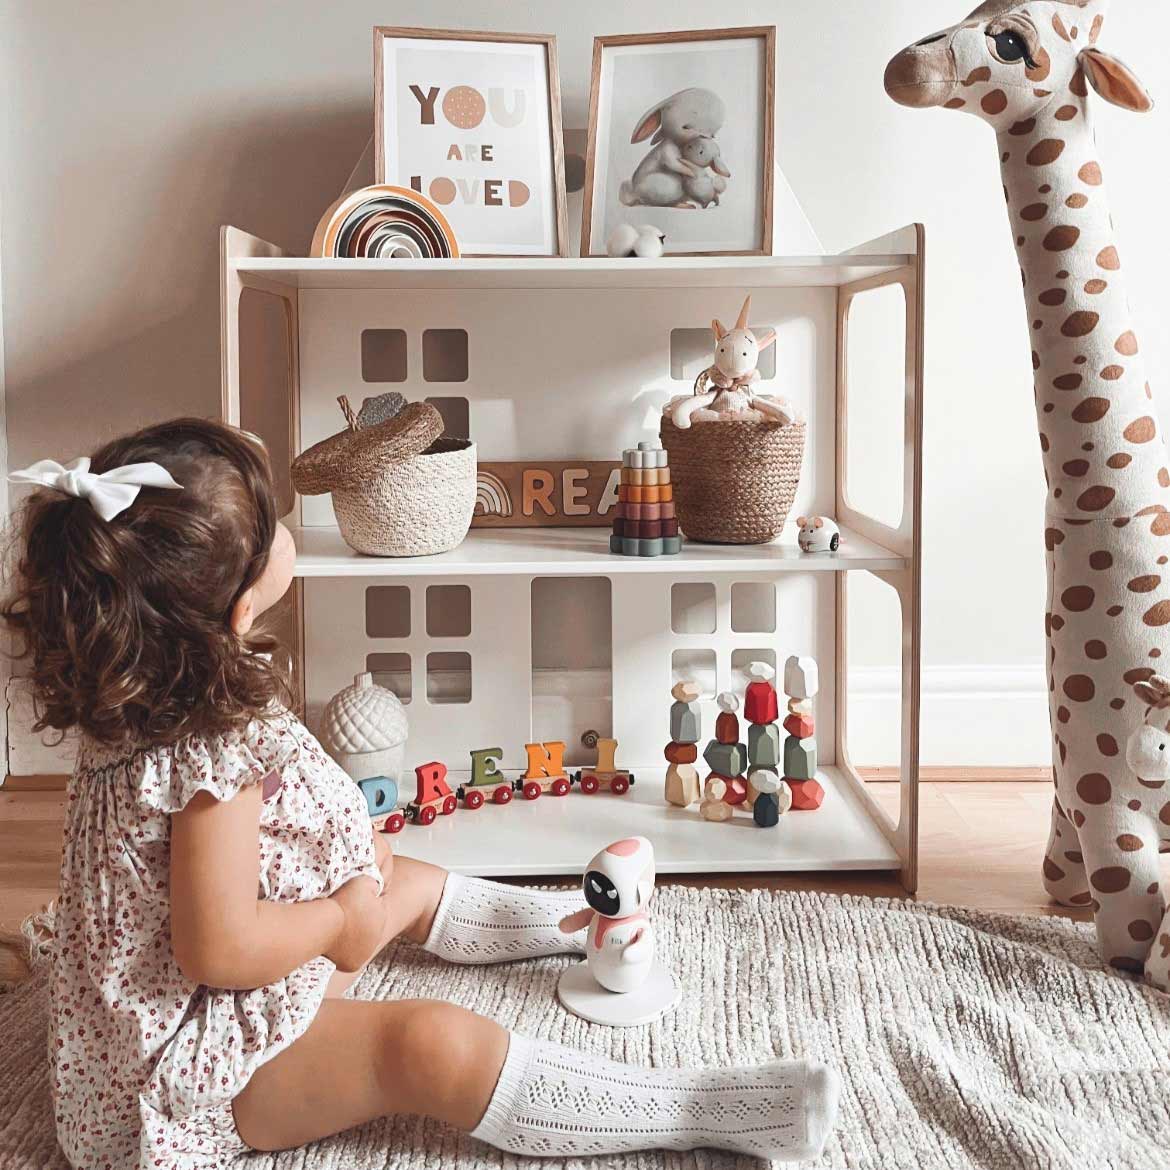 A little girl is playing with a giraffe toy.